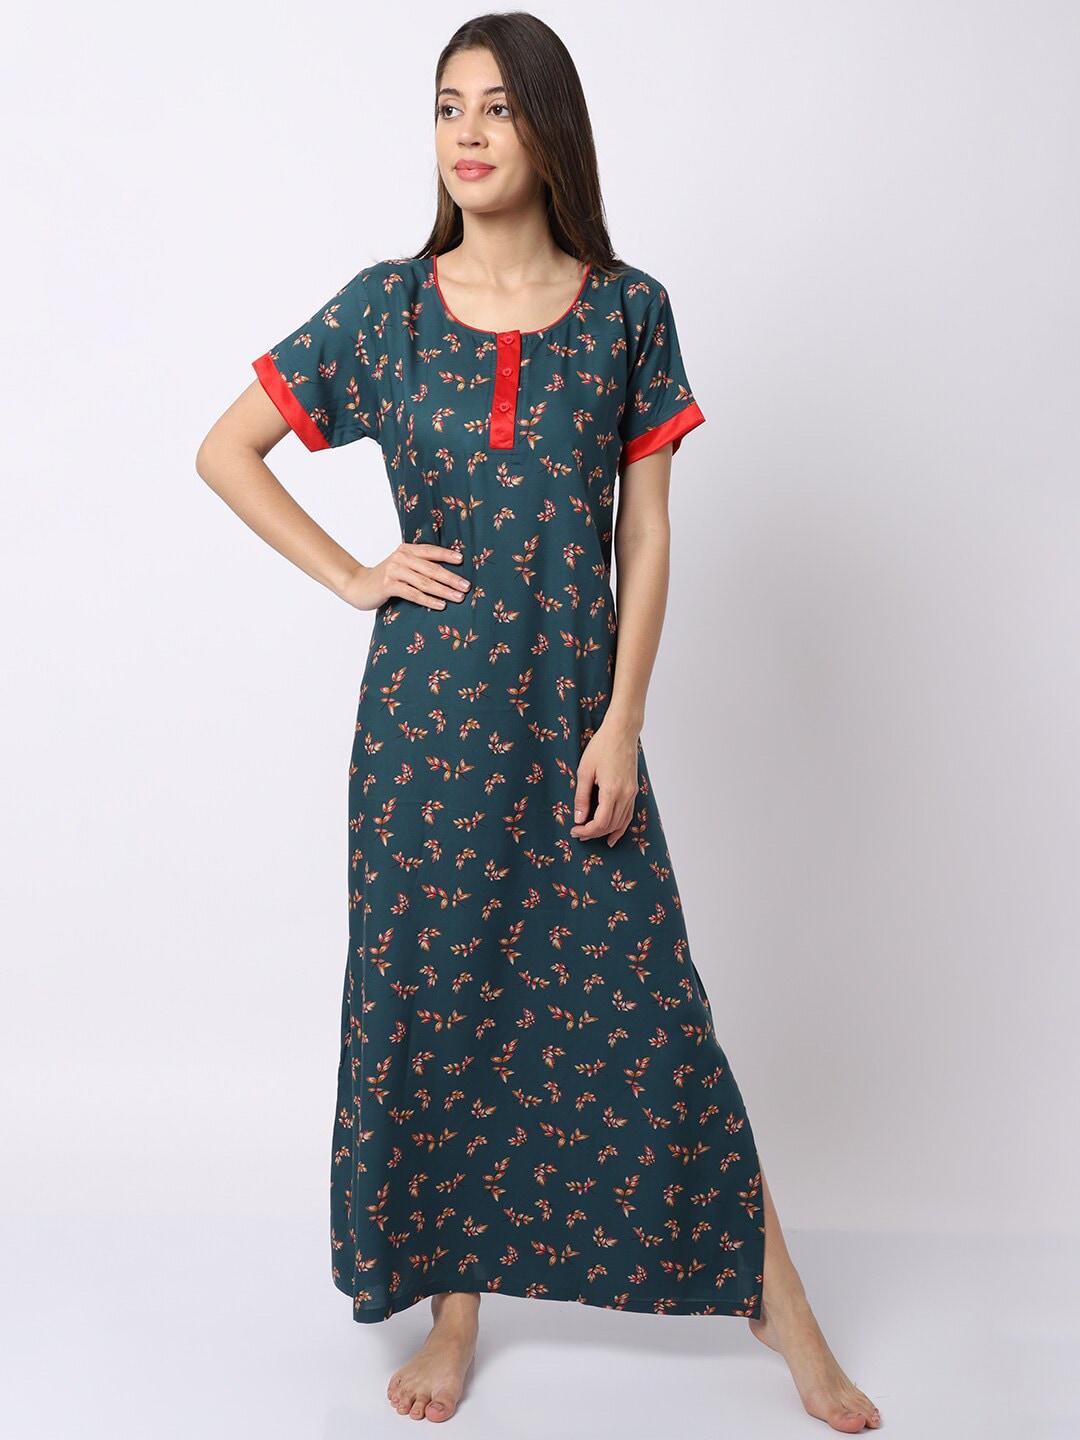 Claura Floral Printed Round Neck Maxi Nightdress